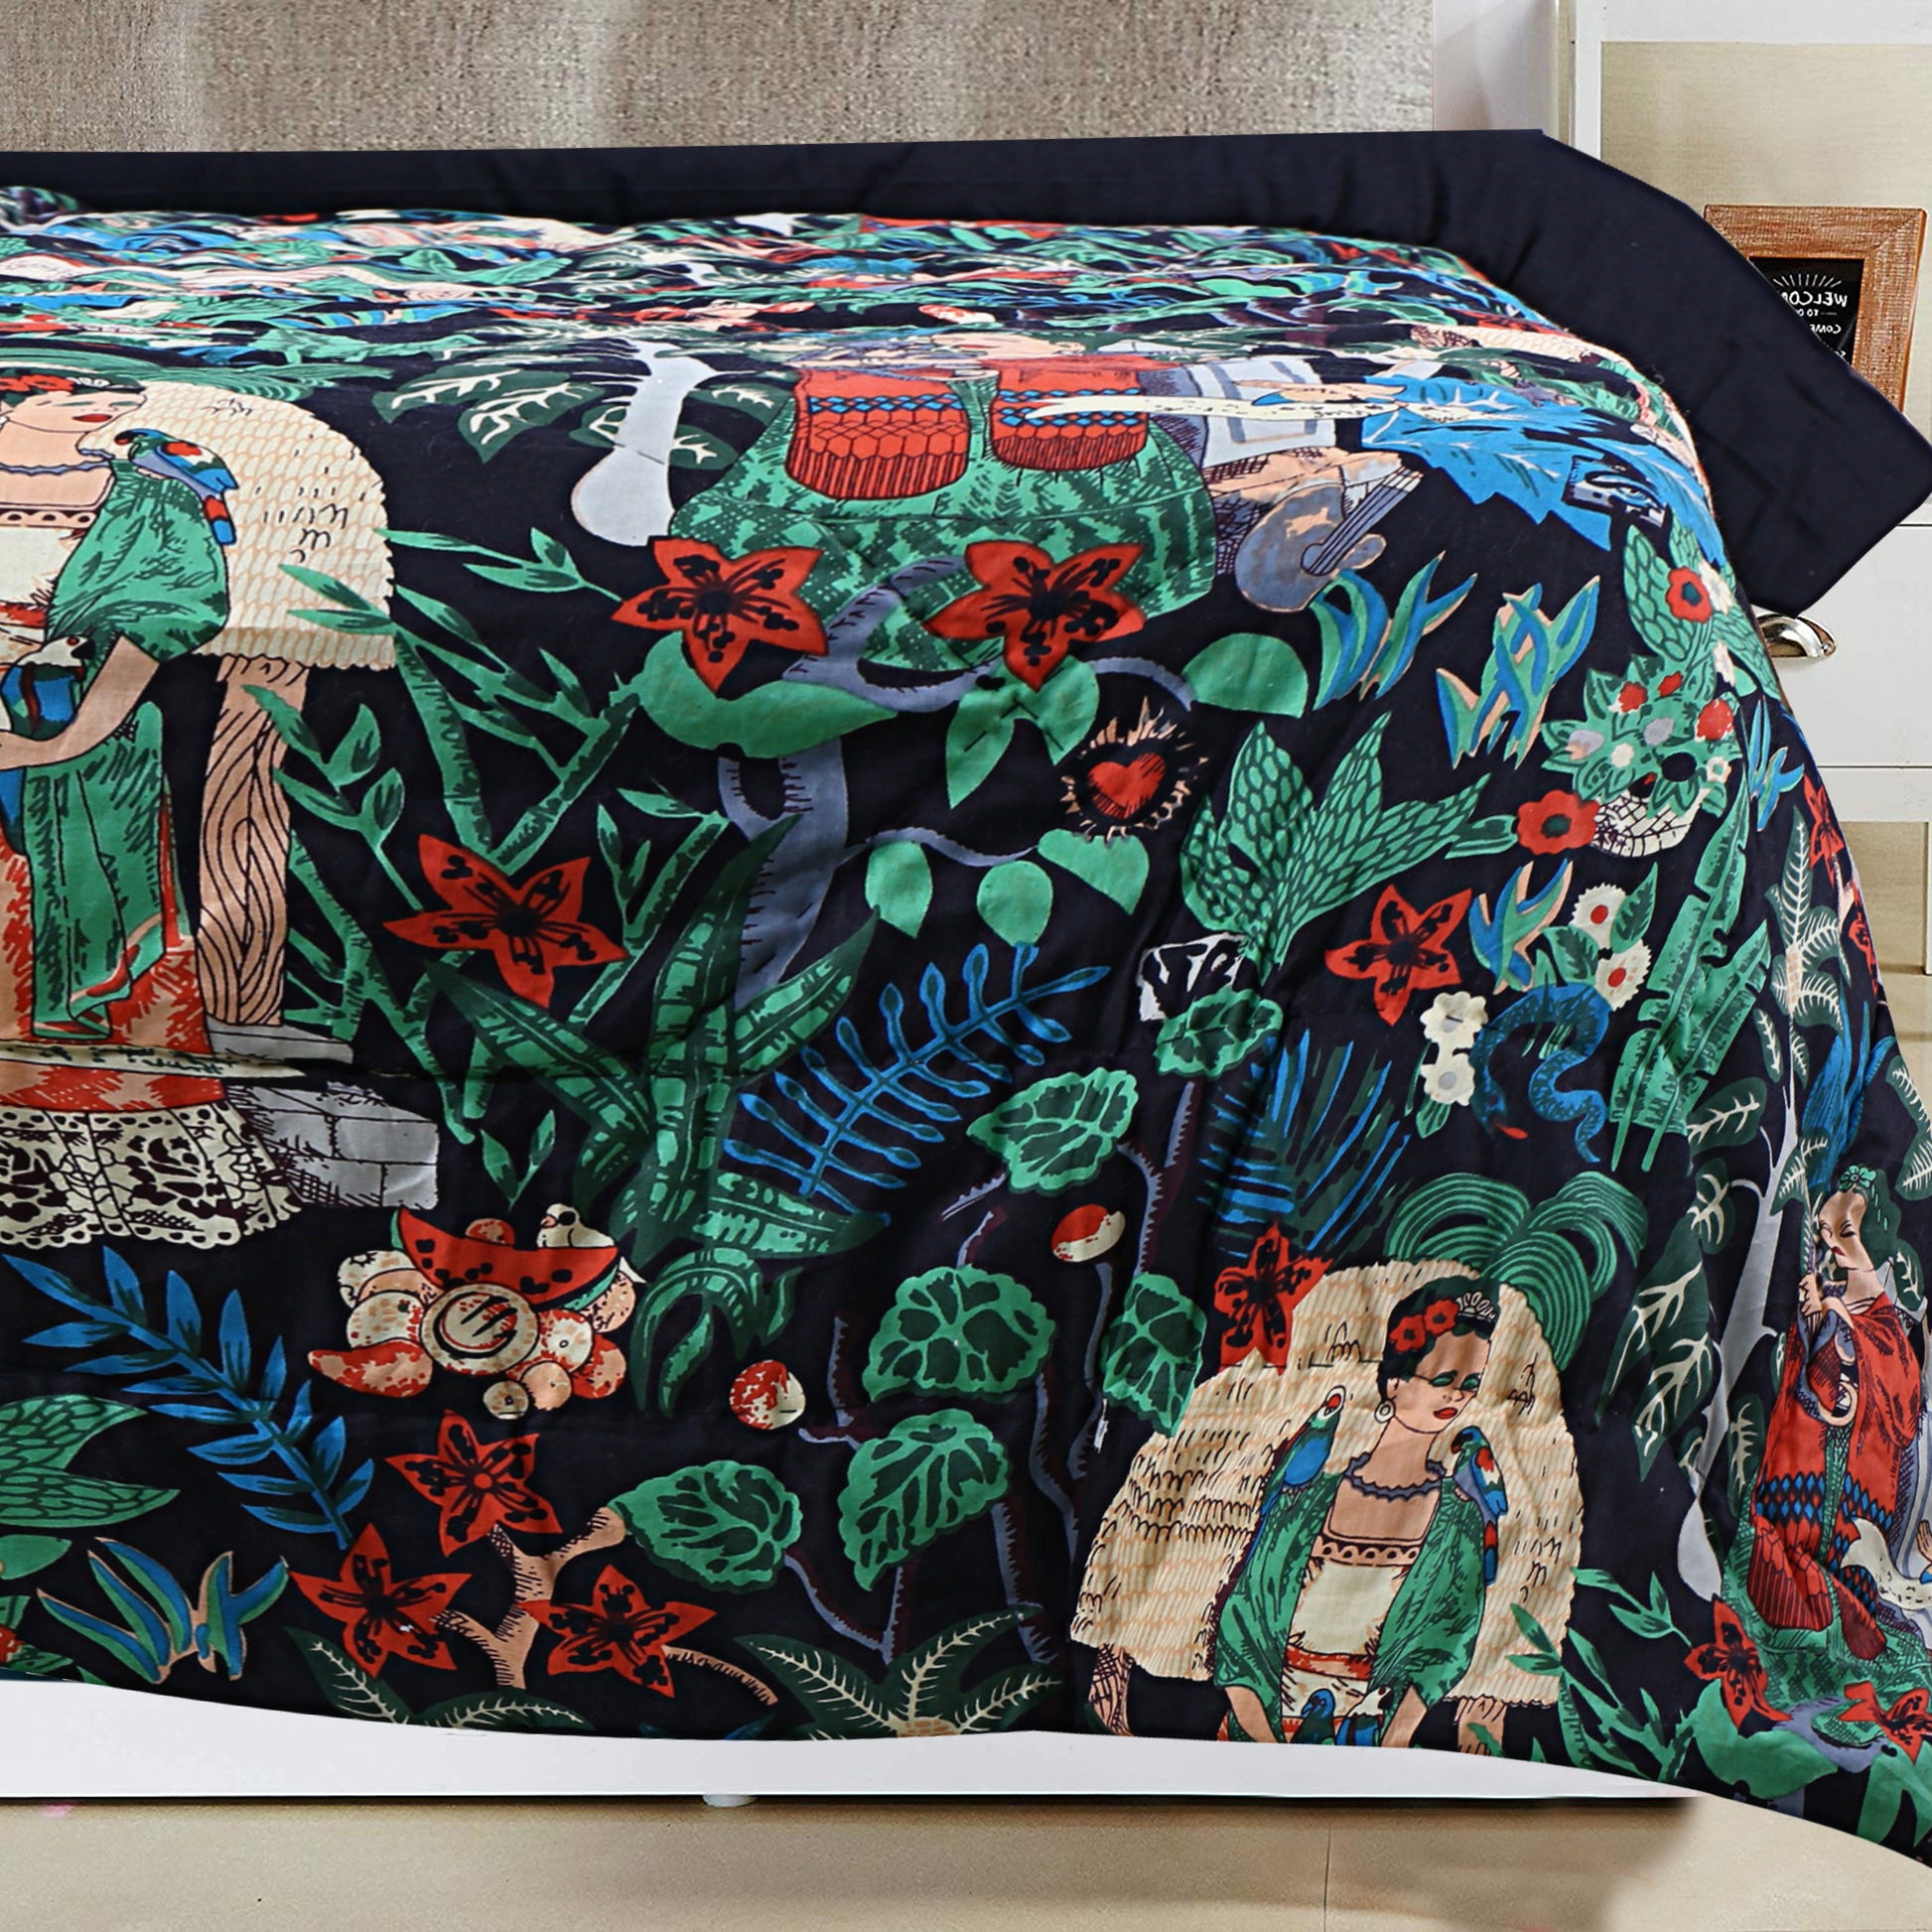 200 GSM Cotton Quilt Frida Kahlo Black with pillow covers - The Teal Thread